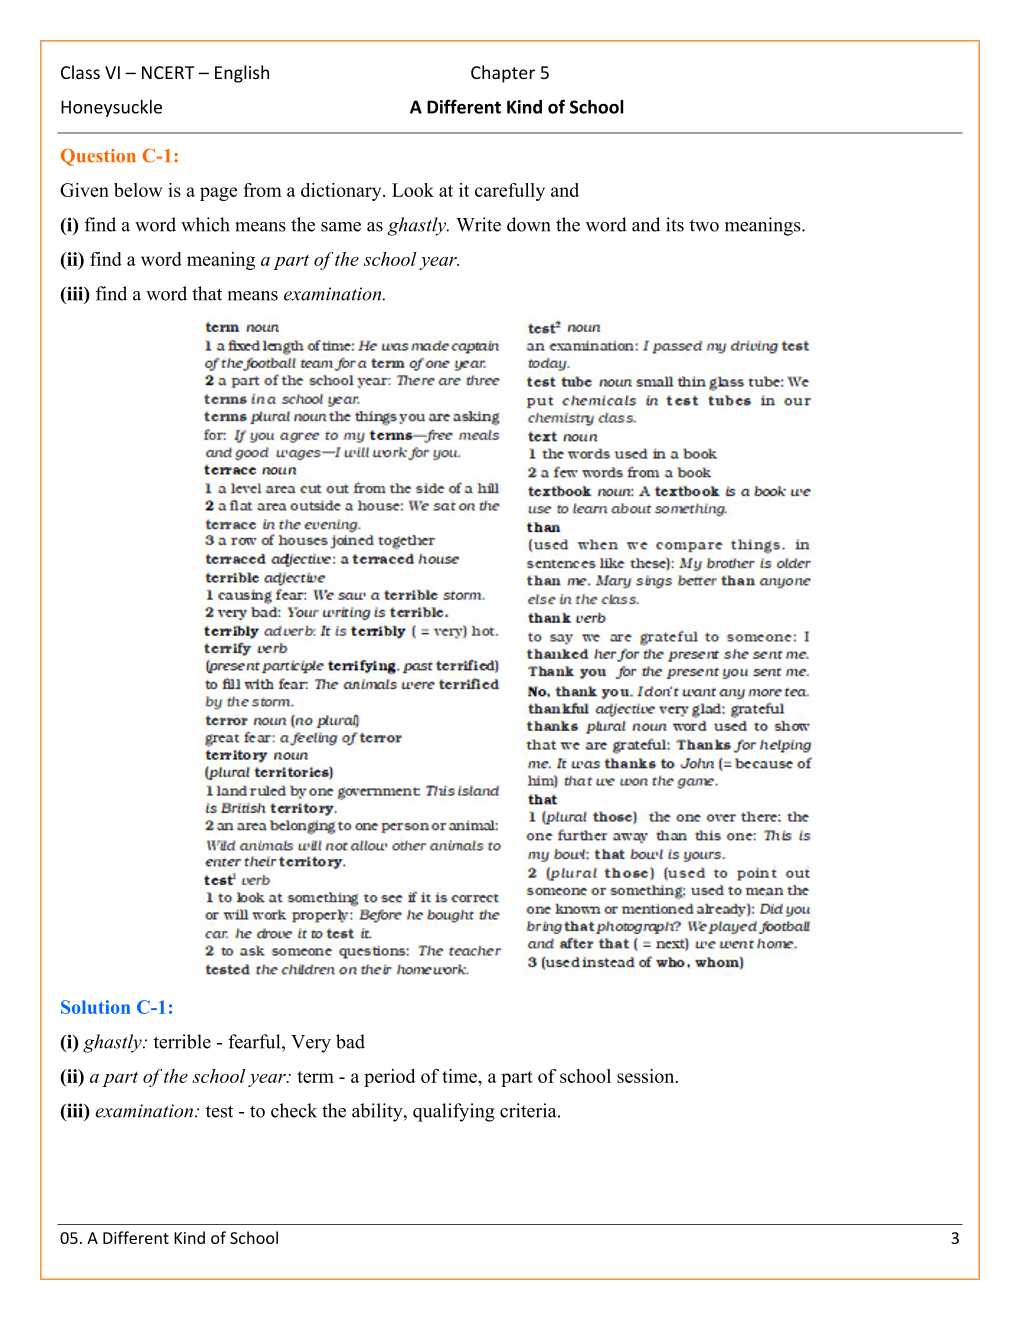 ncert-solutions-for-class-6-english-honeysuckle-chapter-5-a-different